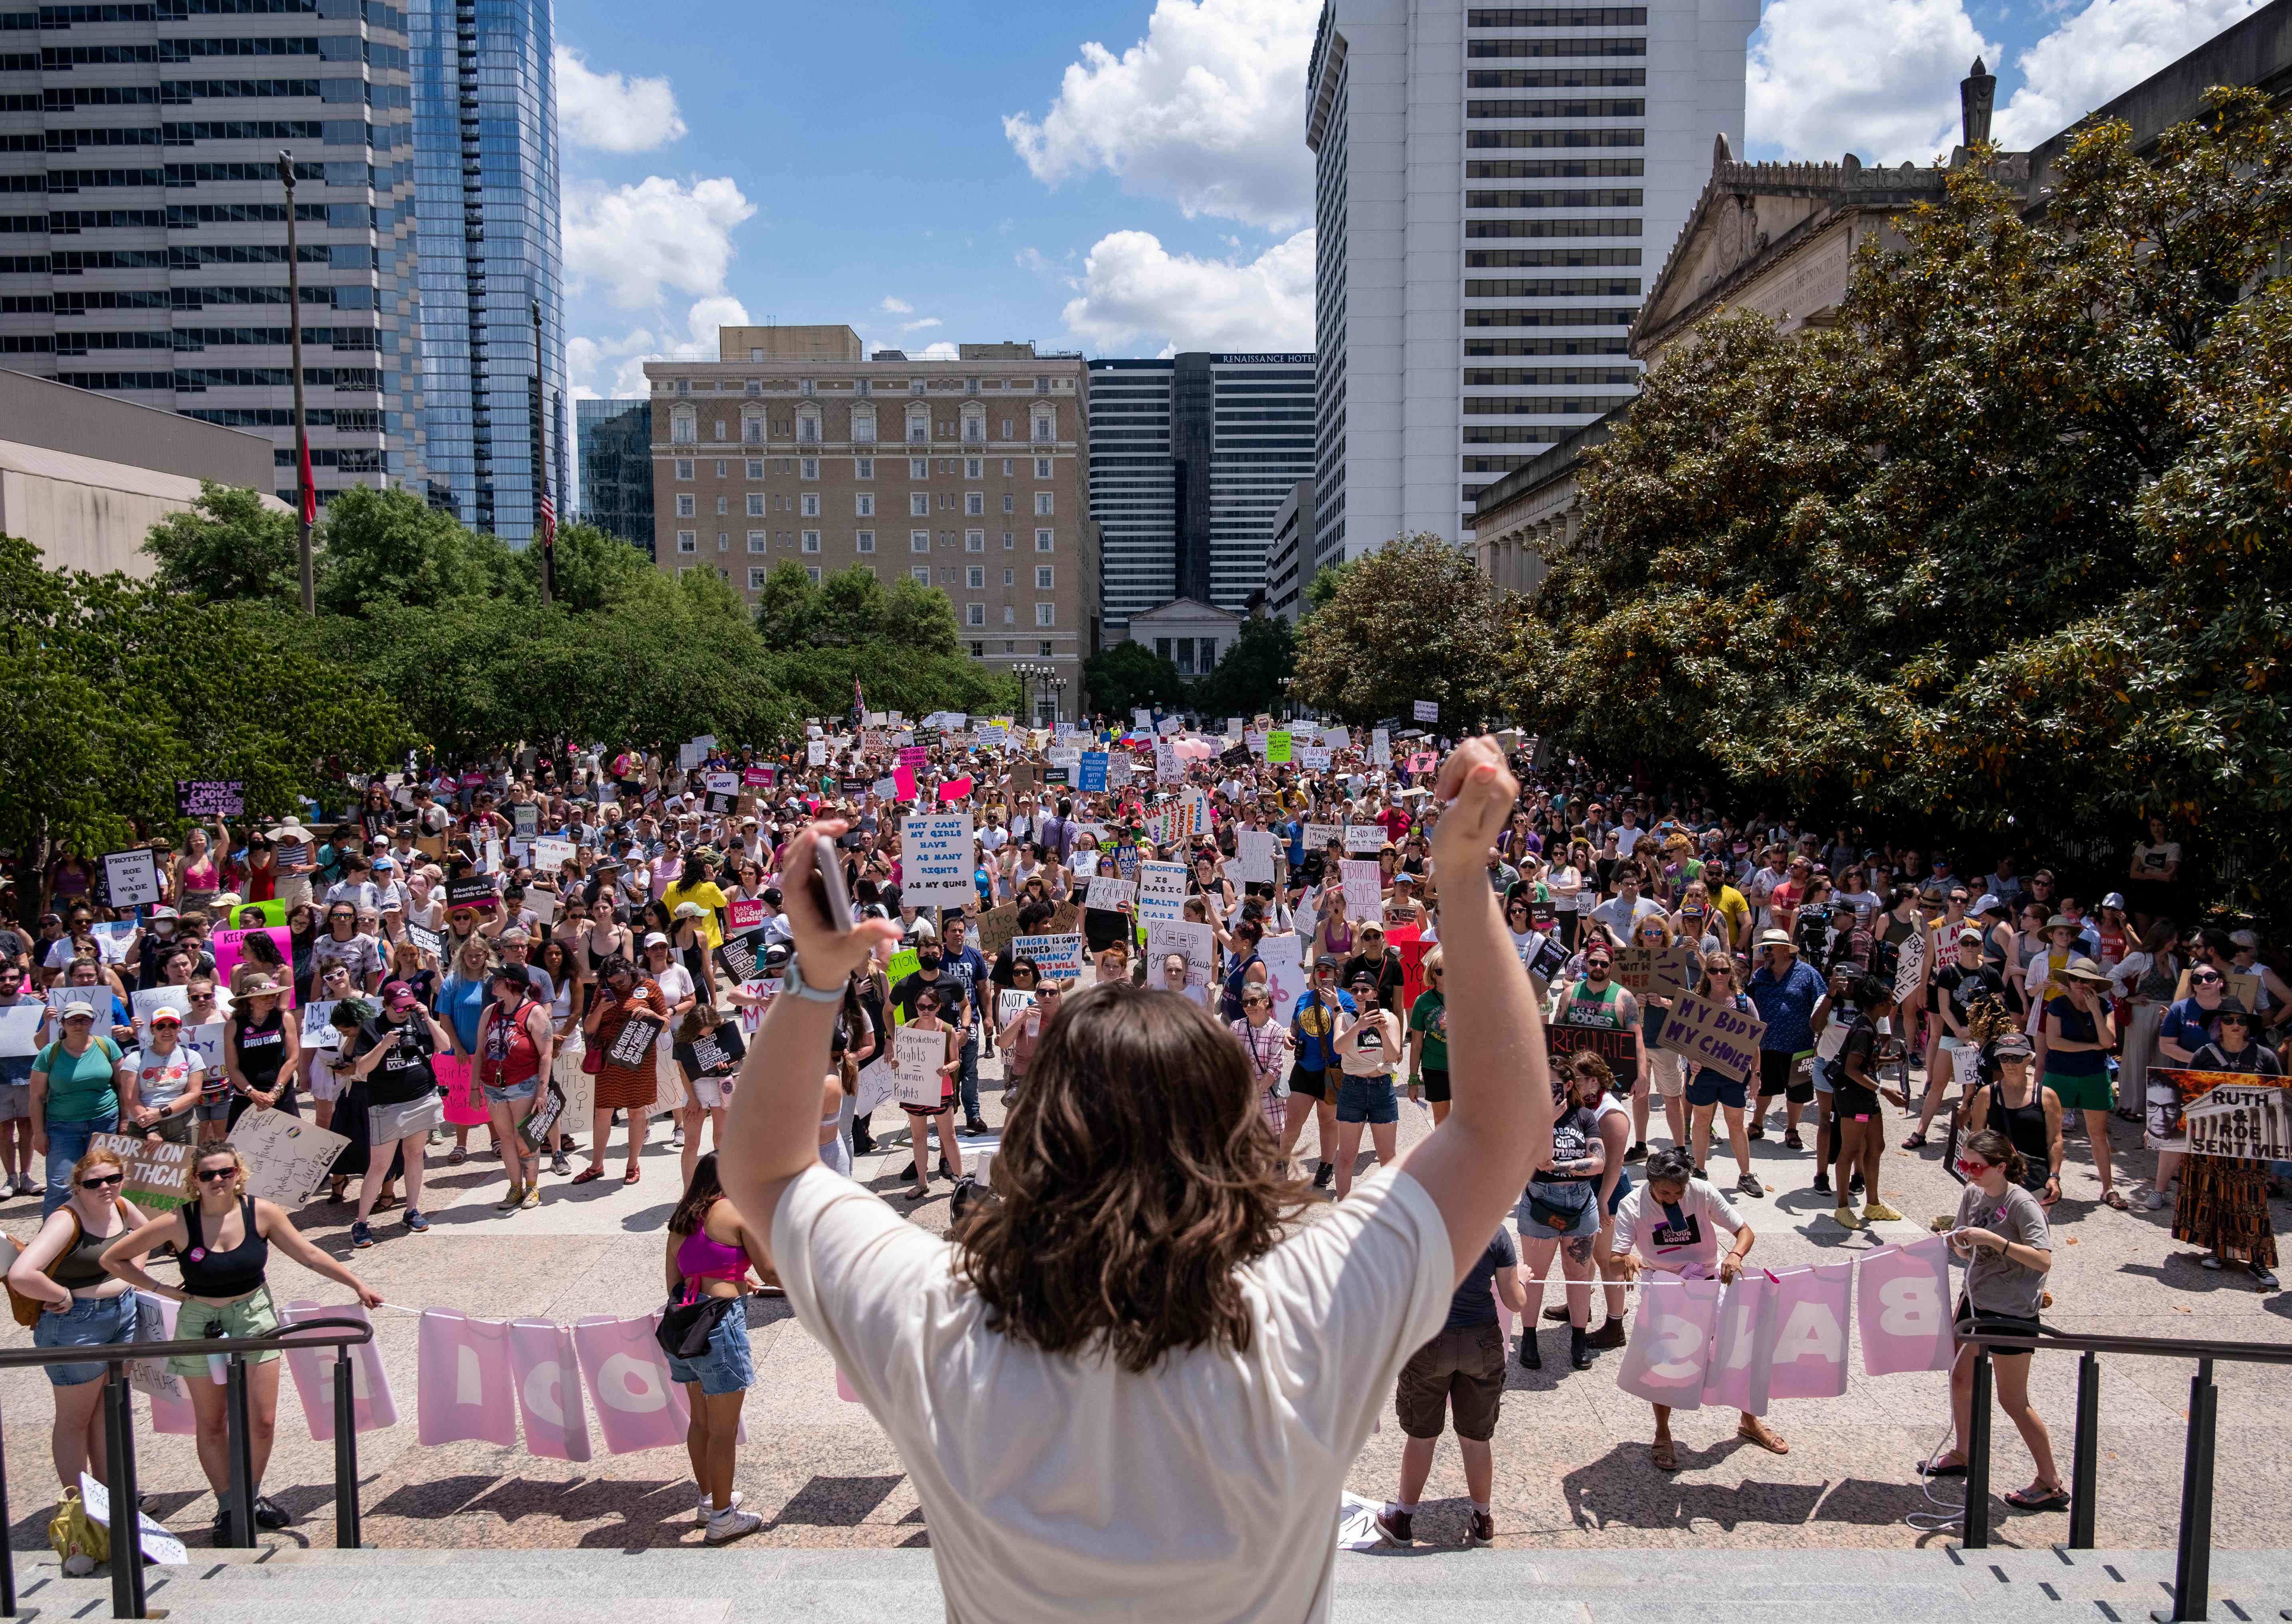 A member of the national Planned Parenthood Association speaks to hundreds gathered near the Tennessee State Capital building in Nashville on 14 May 2022